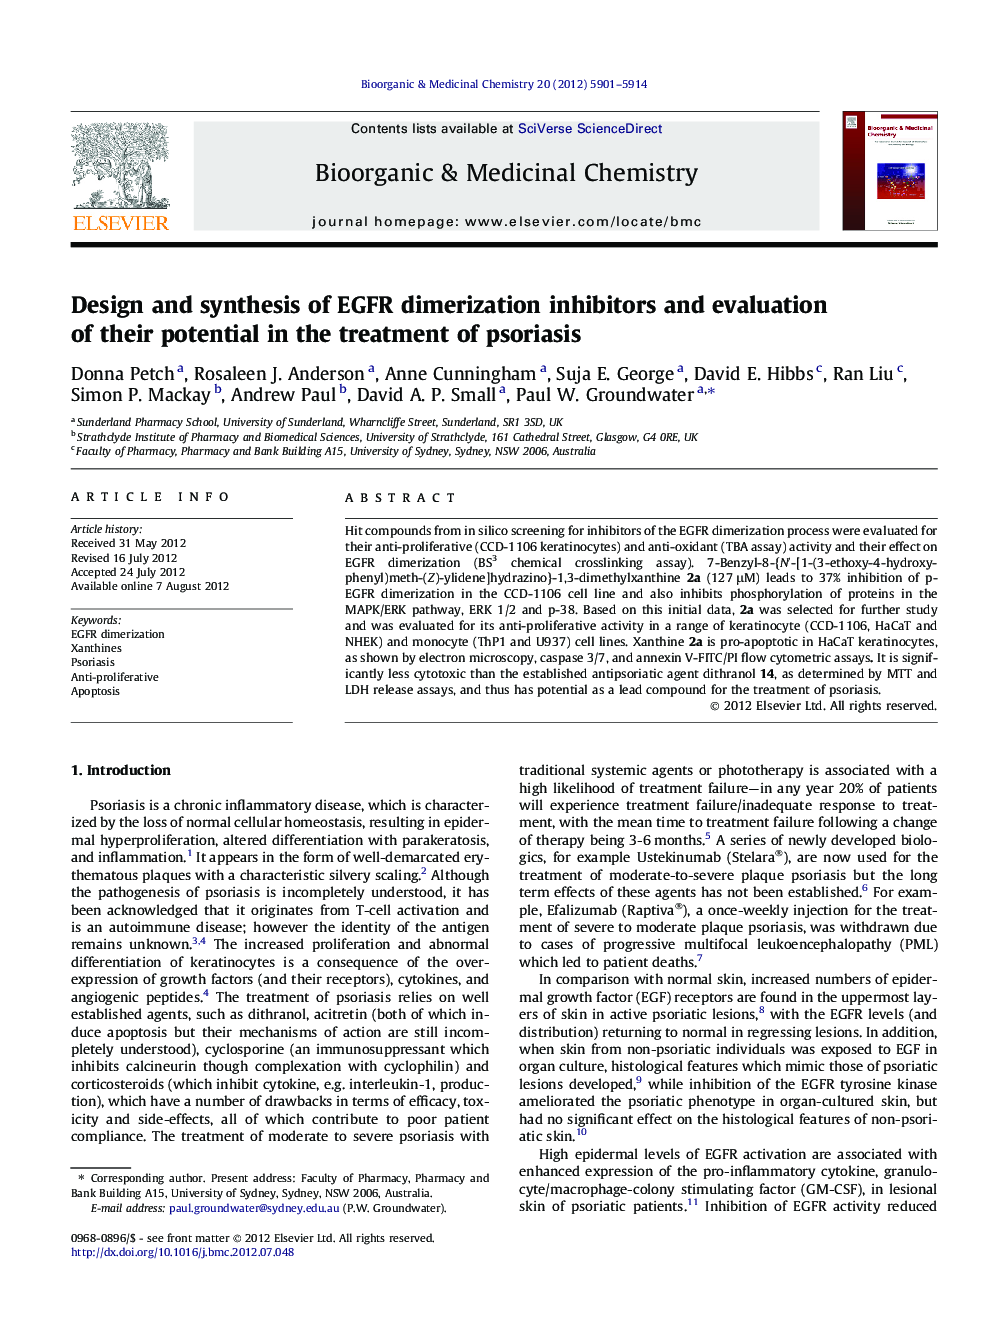 Design and synthesis of EGFR dimerization inhibitors and evaluation of their potential in the treatment of psoriasis